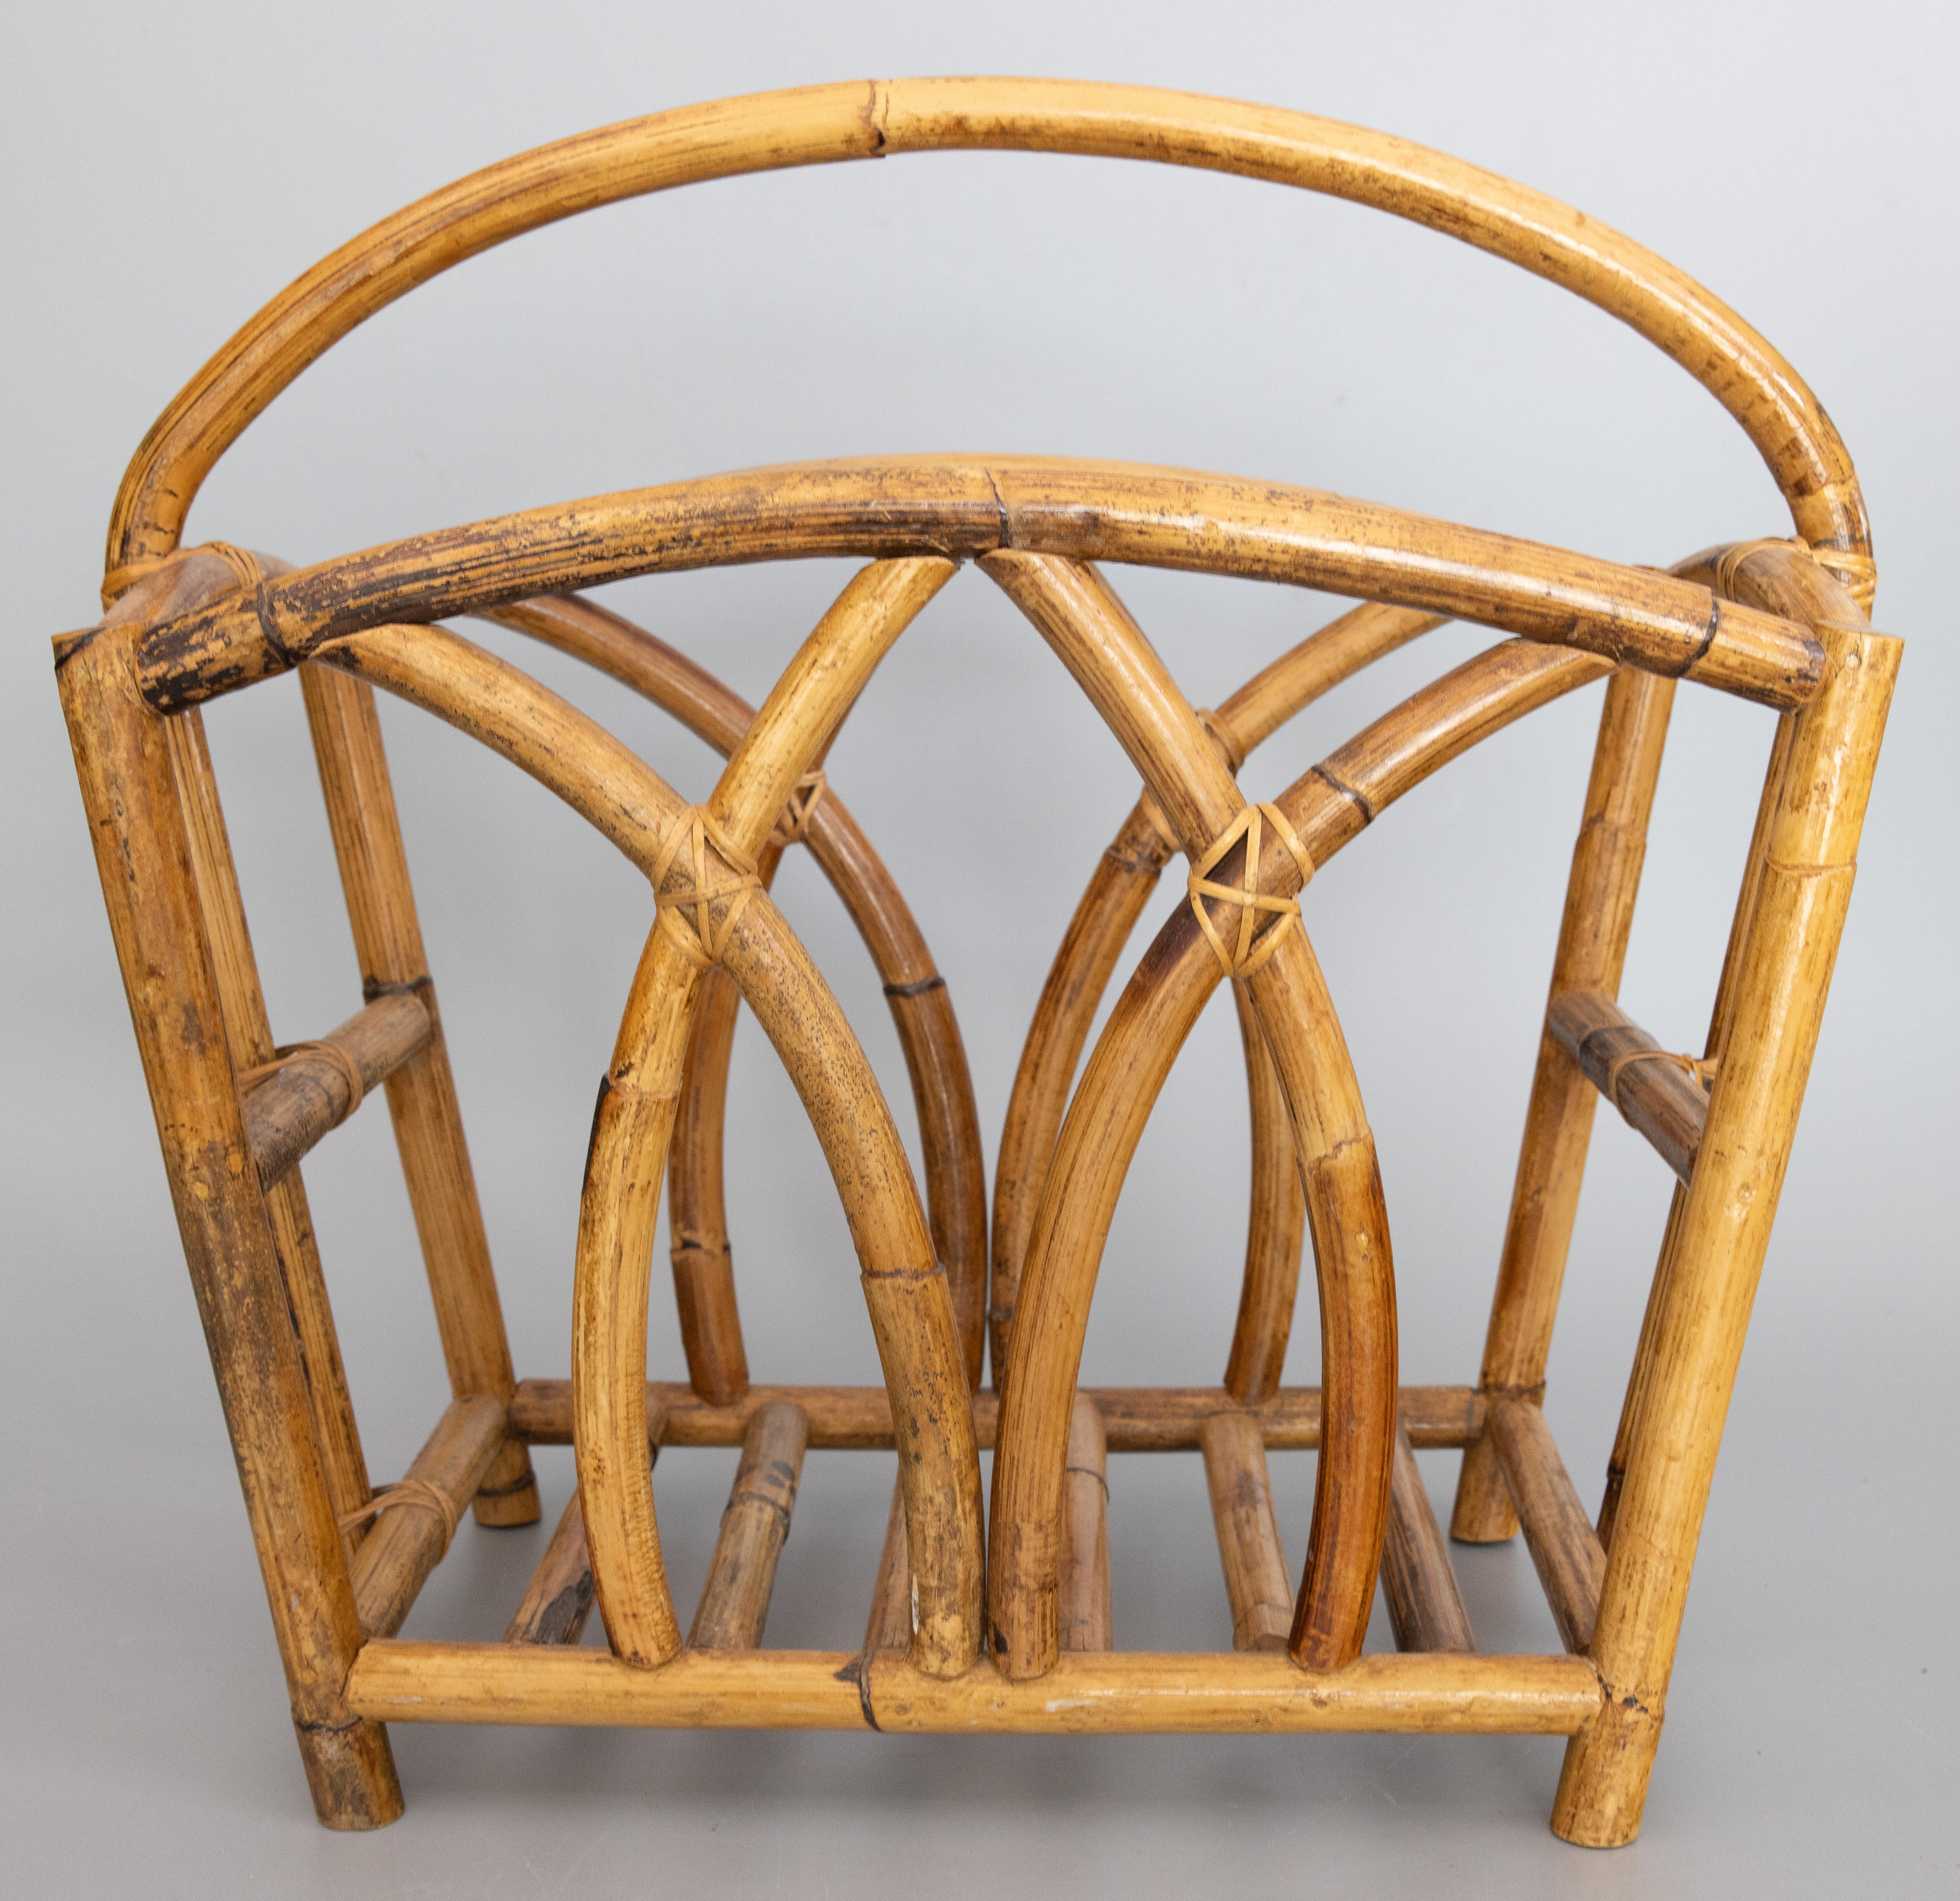 A stylish Mid-Century French bamboo magazine rack. It's a nice large size with a lovely curved design, perfect for storing magazines or books.

DIMENSIONS
20.25ʺW × 9.5ʺD × 18.75ʺH